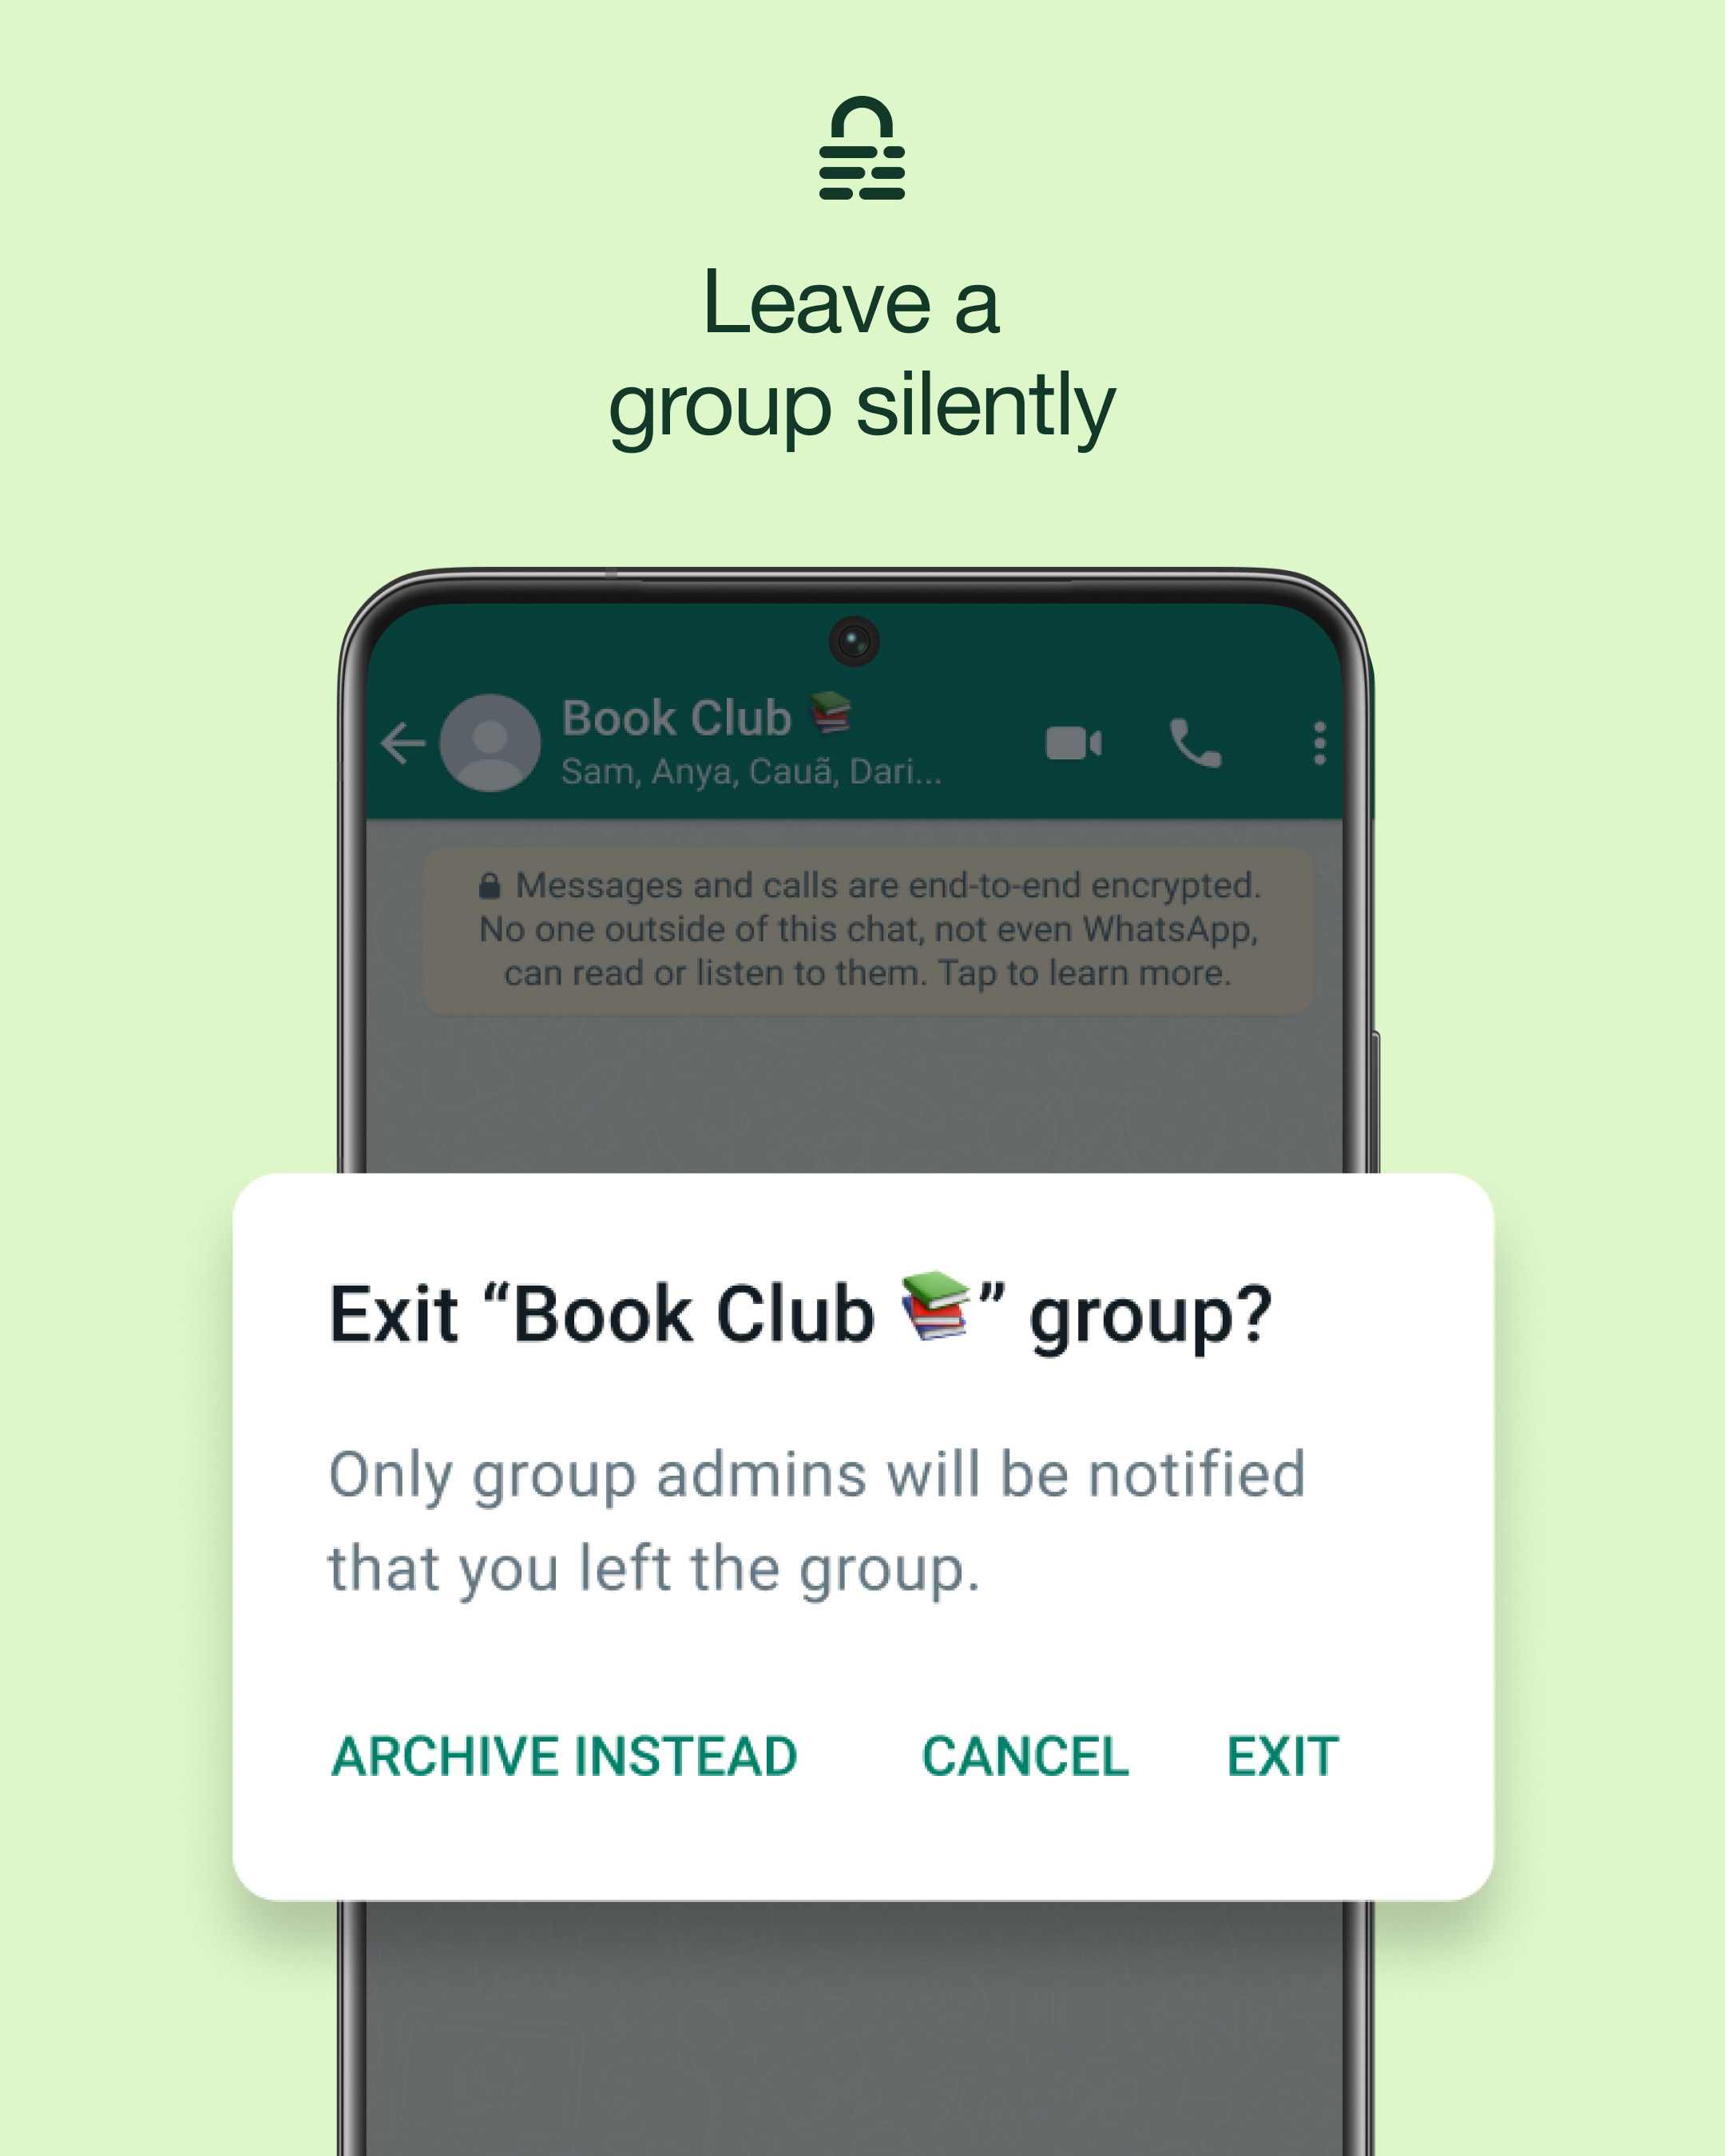 The WhatsApp interface showing a prompt when exiting a group.